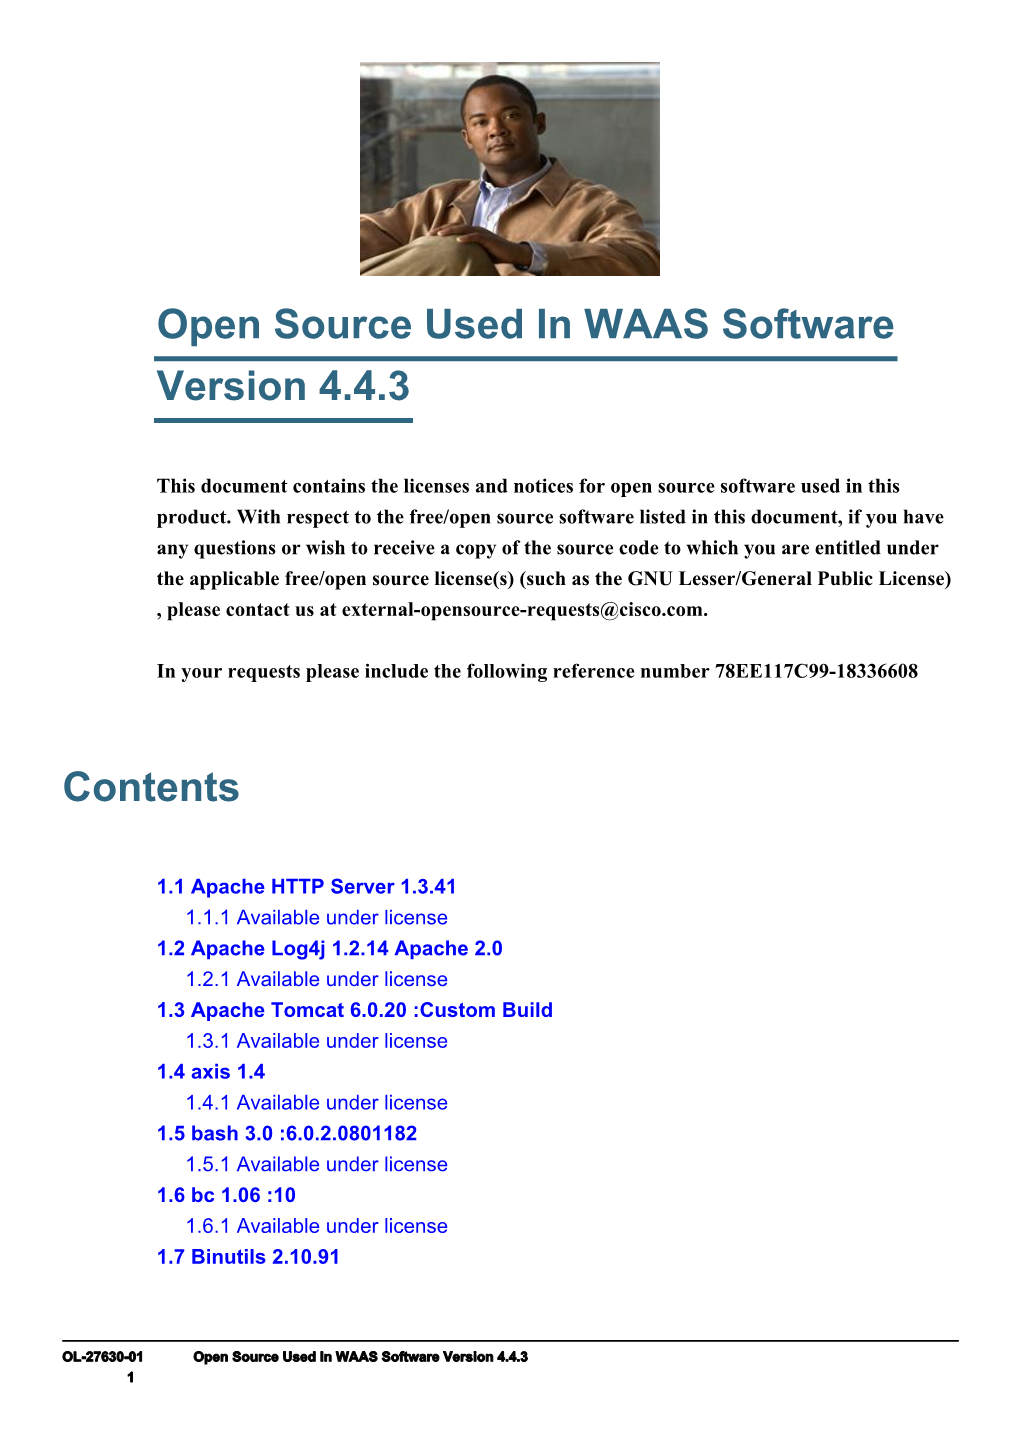 Open Source Used in WAAS Software Version 4.4.3